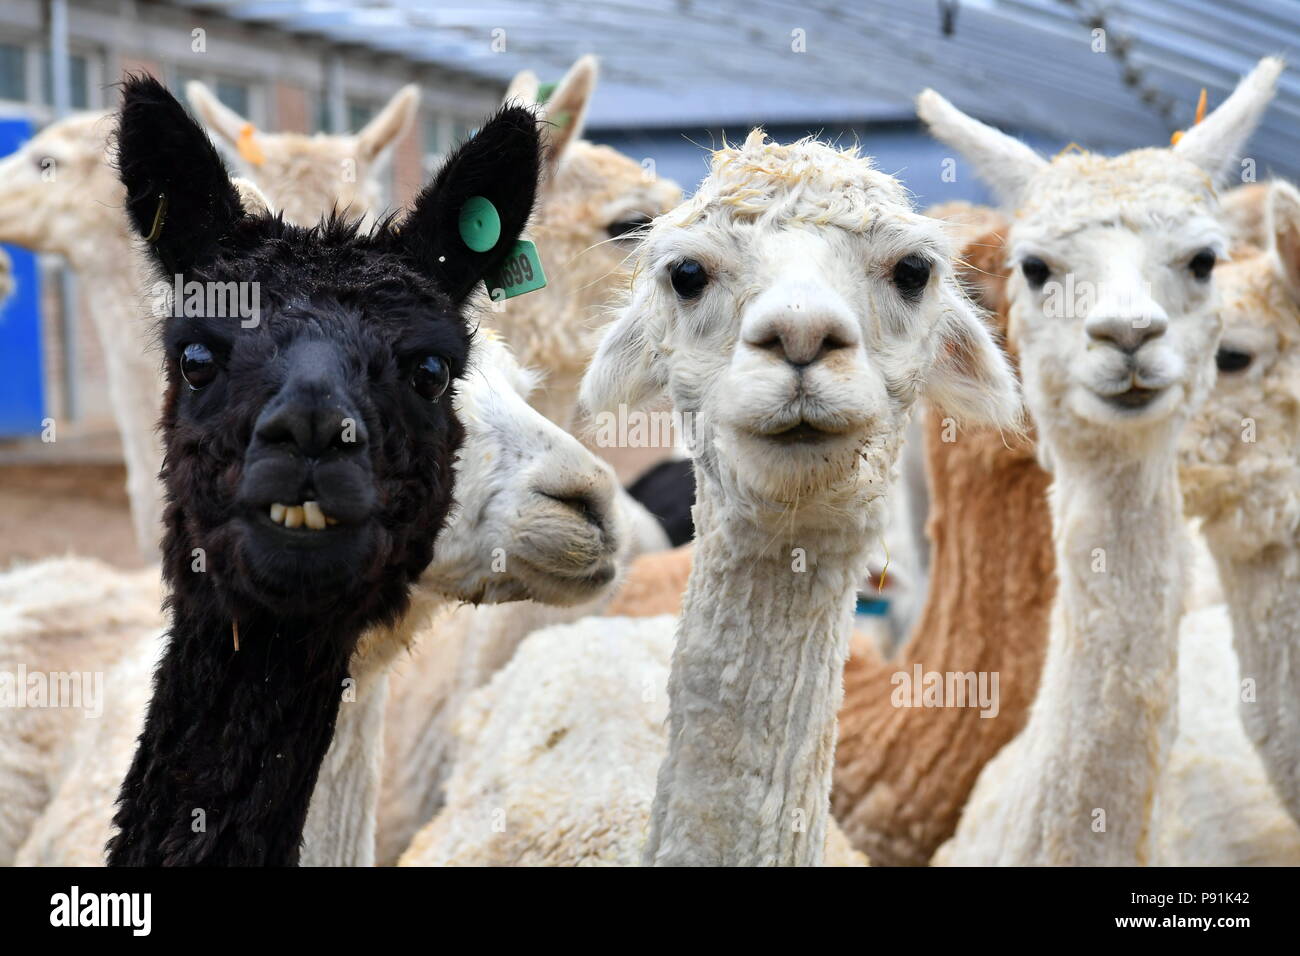 (180714) -- YANGQU, July 14, 2018 (Xinhua) -- Alpacas are seen at the alpaca breeding base in Yangqu County of north China's Shanxi Province, July 10, 2018. Liu Xuerong, a poverty-stricken farmer from Pingli Village of Yangqu County, has never dreamed of getting rich with a flock of cute alpacas. In 2014, as a breeding base of a thousand alpacas was built, Liu started embarking on cultivating those Australia-originated alpacas. The breeding base makes a profit from cub breeding, woolen products and tourism of alpaca watching. Liu accordingly earns a monthly wage of 3000 yuan (449 U.S. Stock Photo